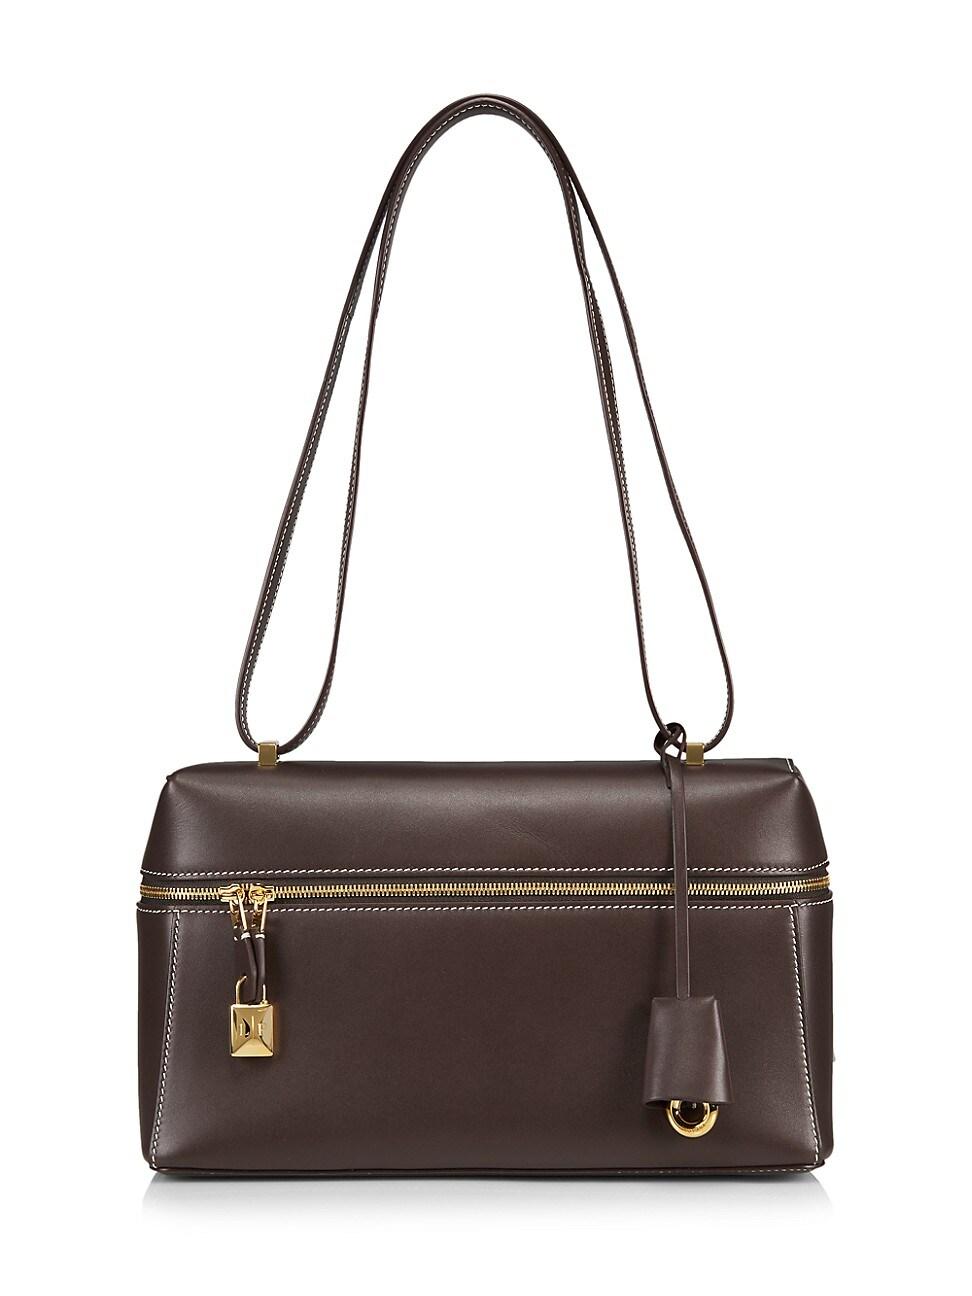 Loro Piana Extra Bag L27 Leather Shoulder Bag in Brown | Lyst